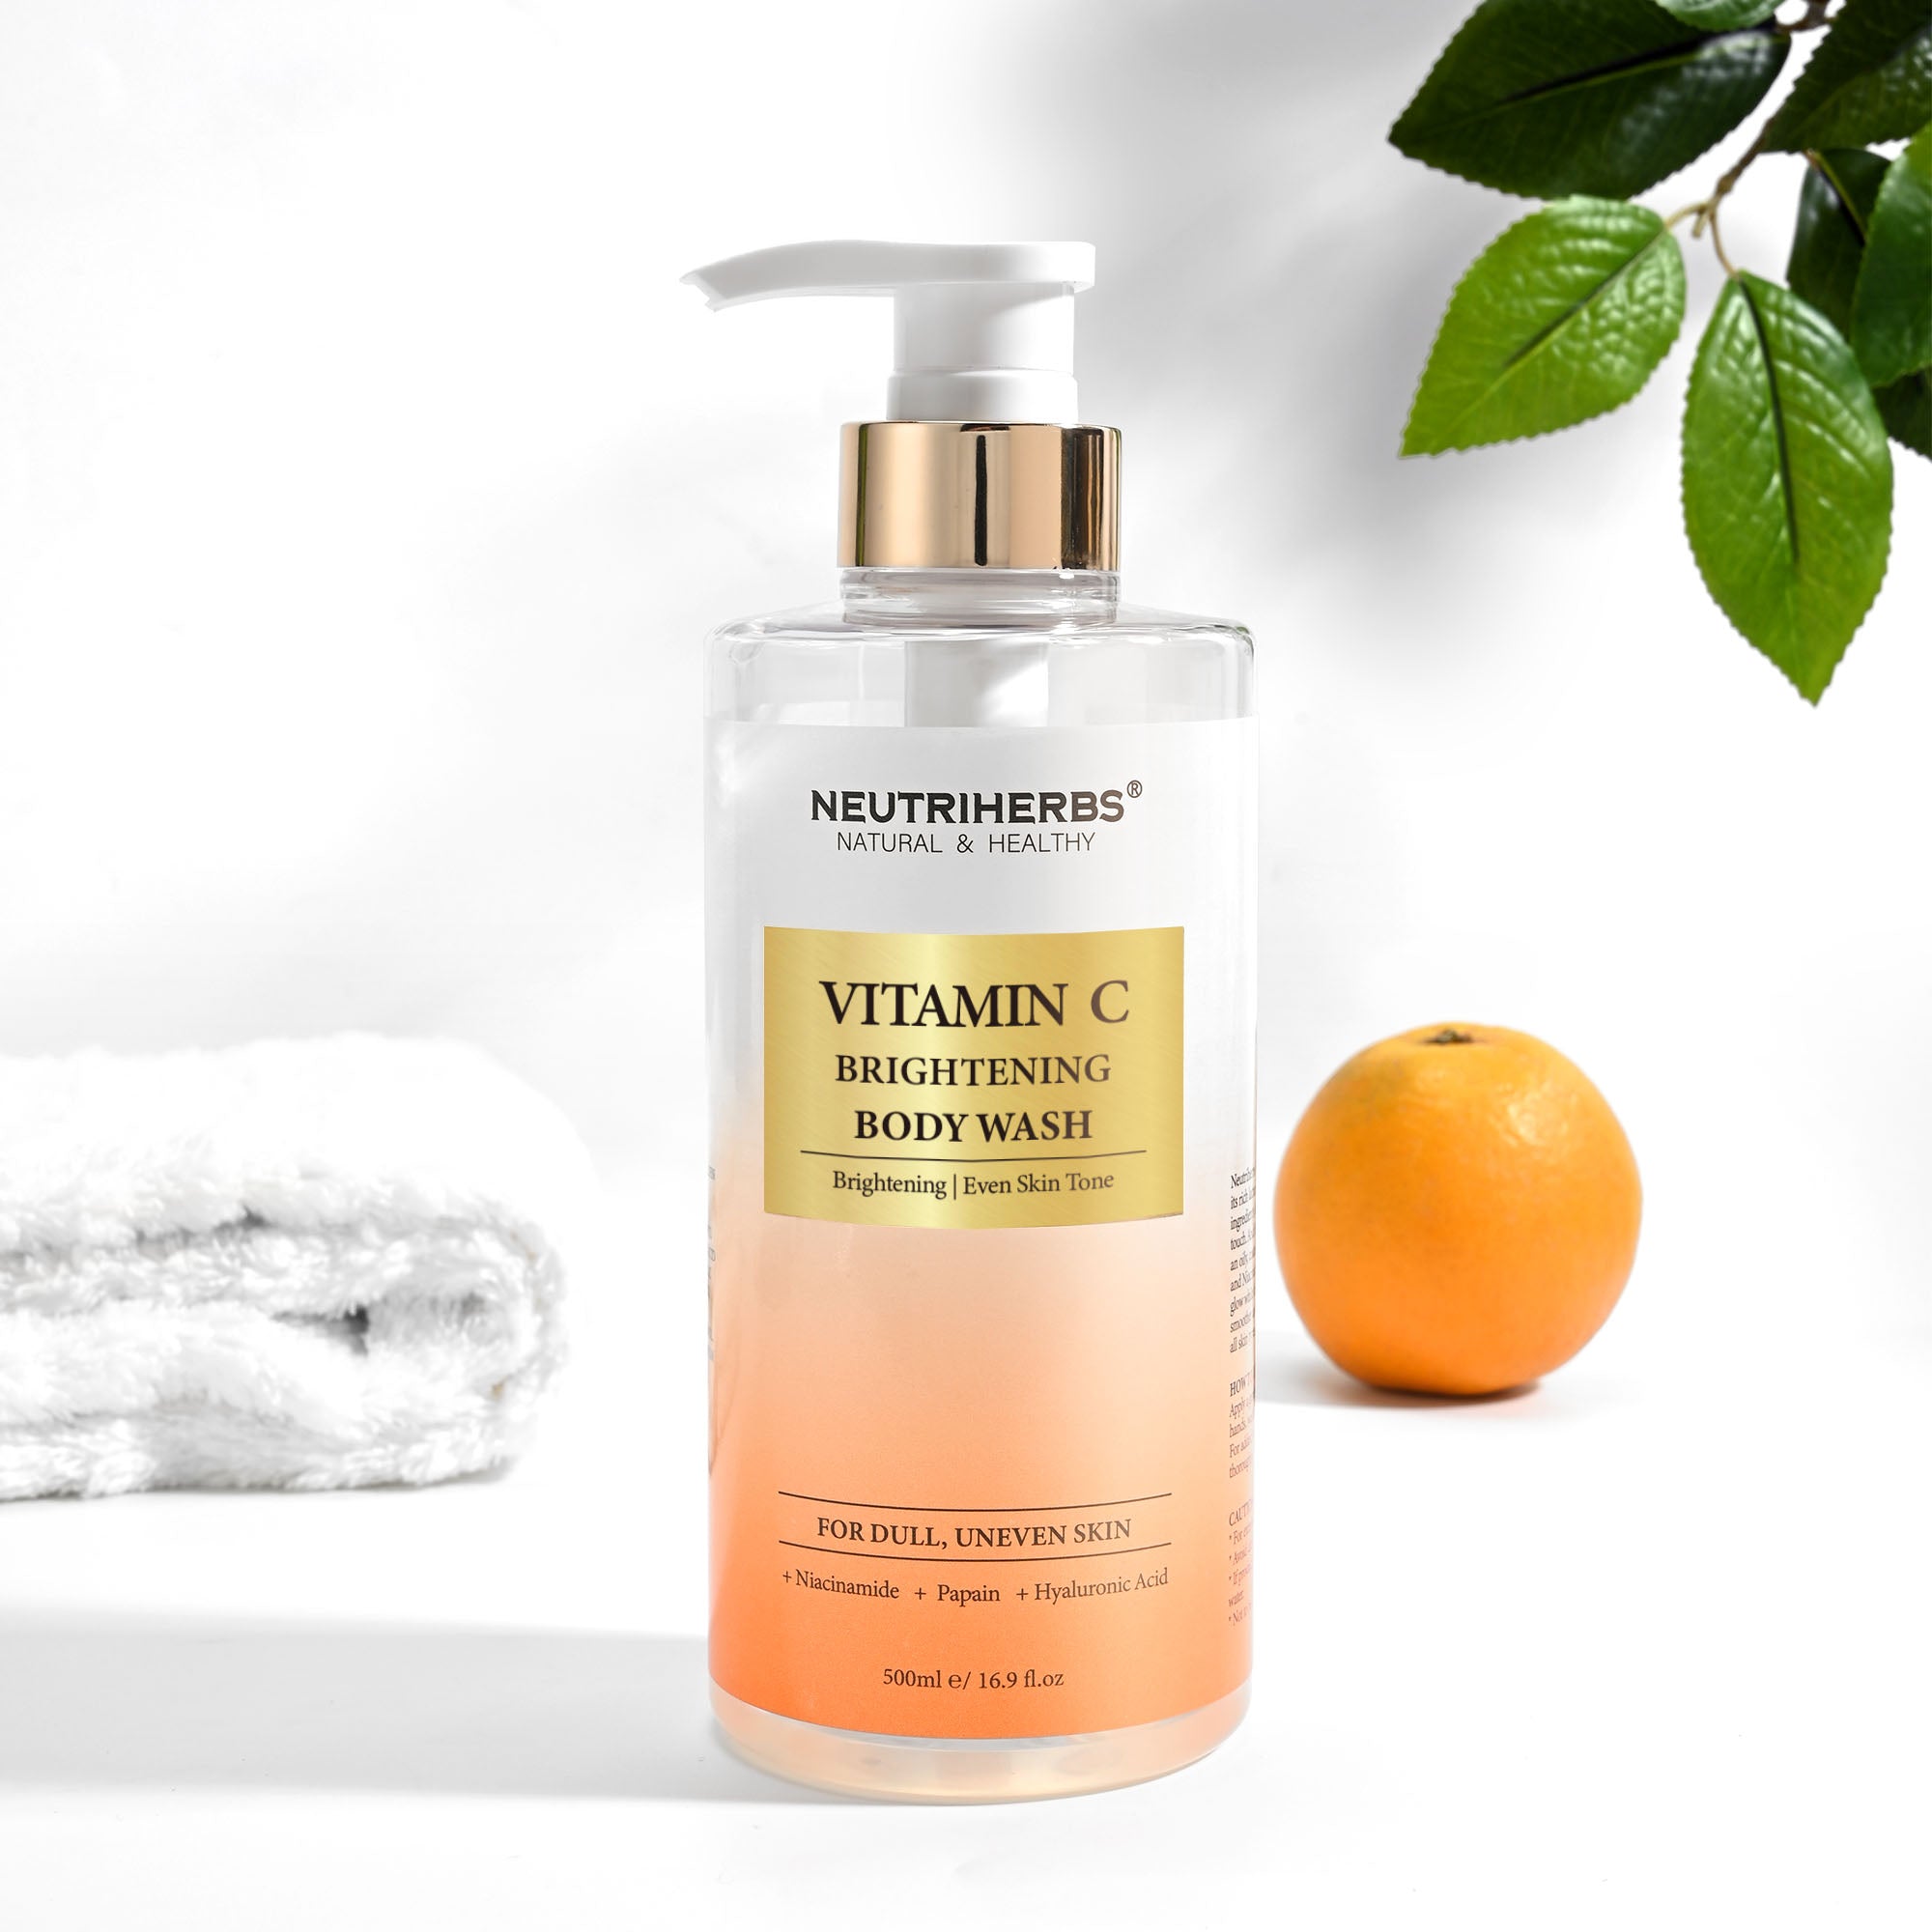 vitamin c body wash improves the look of uneven skin tone and discoloration